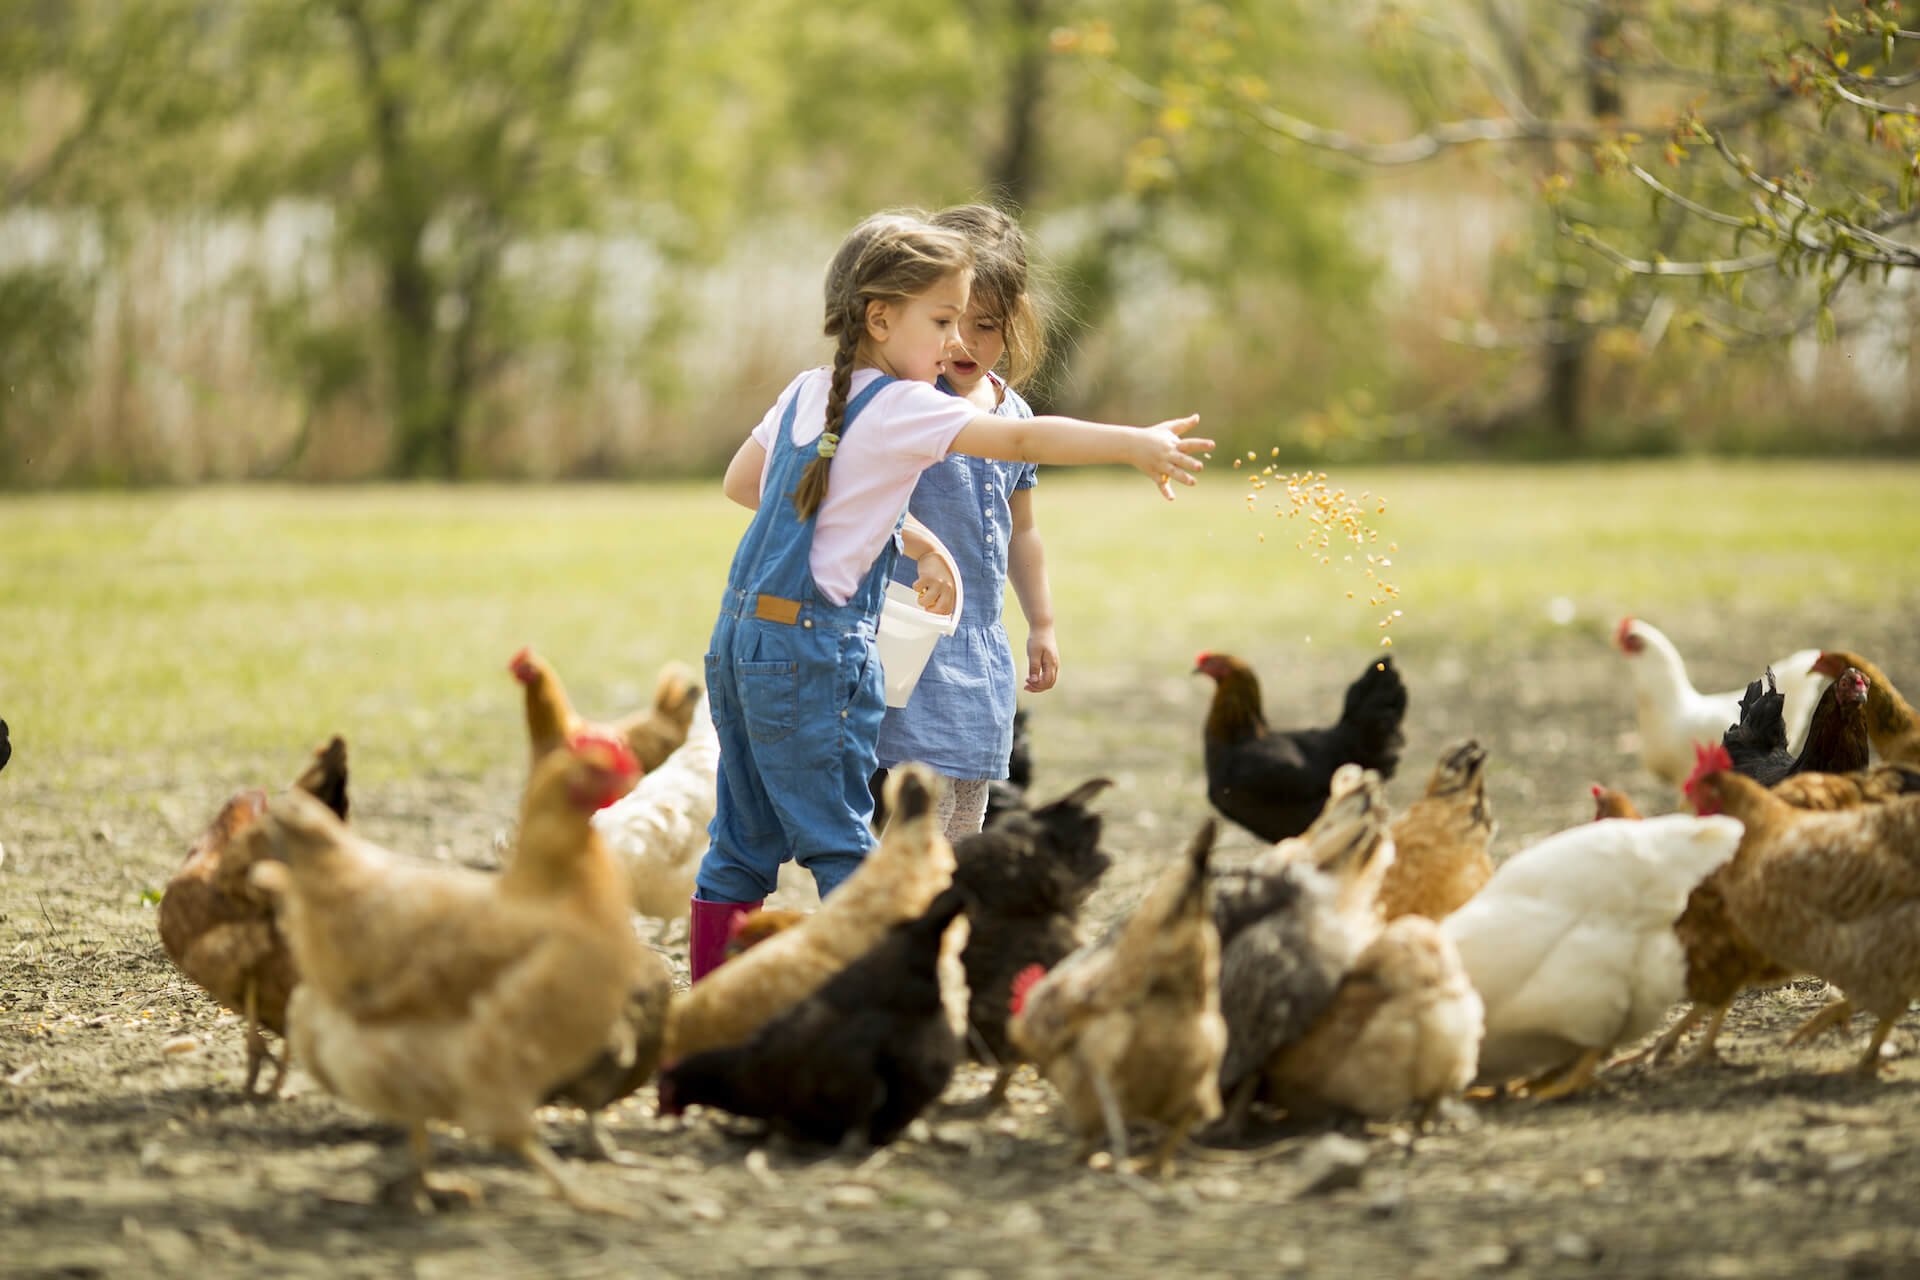 Two children feeding chickens outdoors